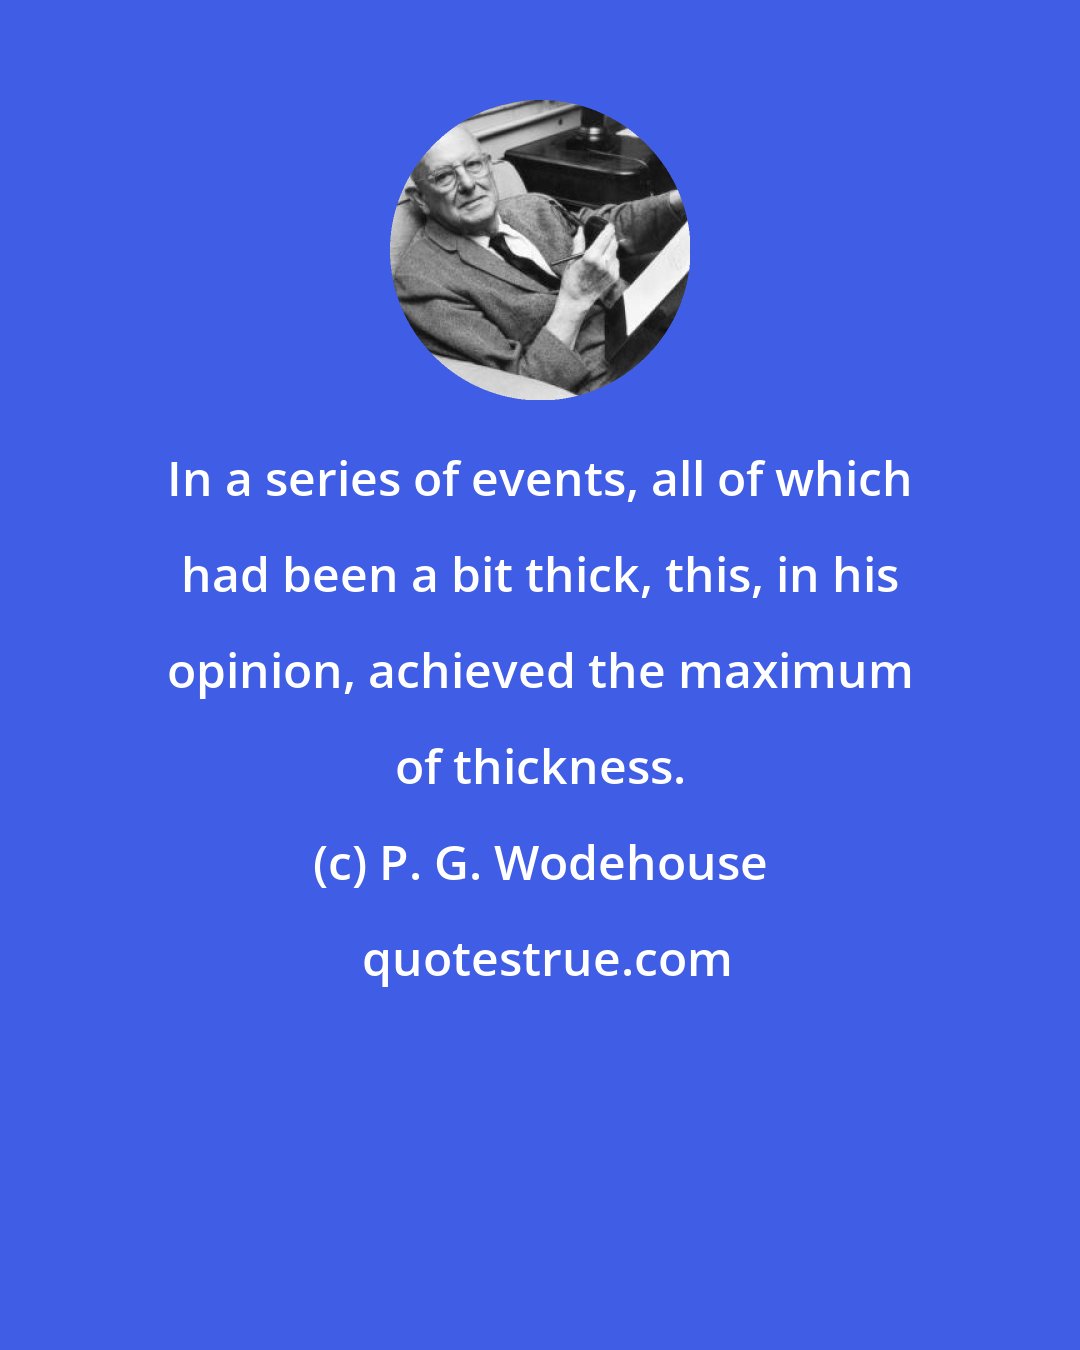 P. G. Wodehouse: In a series of events, all of which had been a bit thick, this, in his opinion, achieved the maximum of thickness.